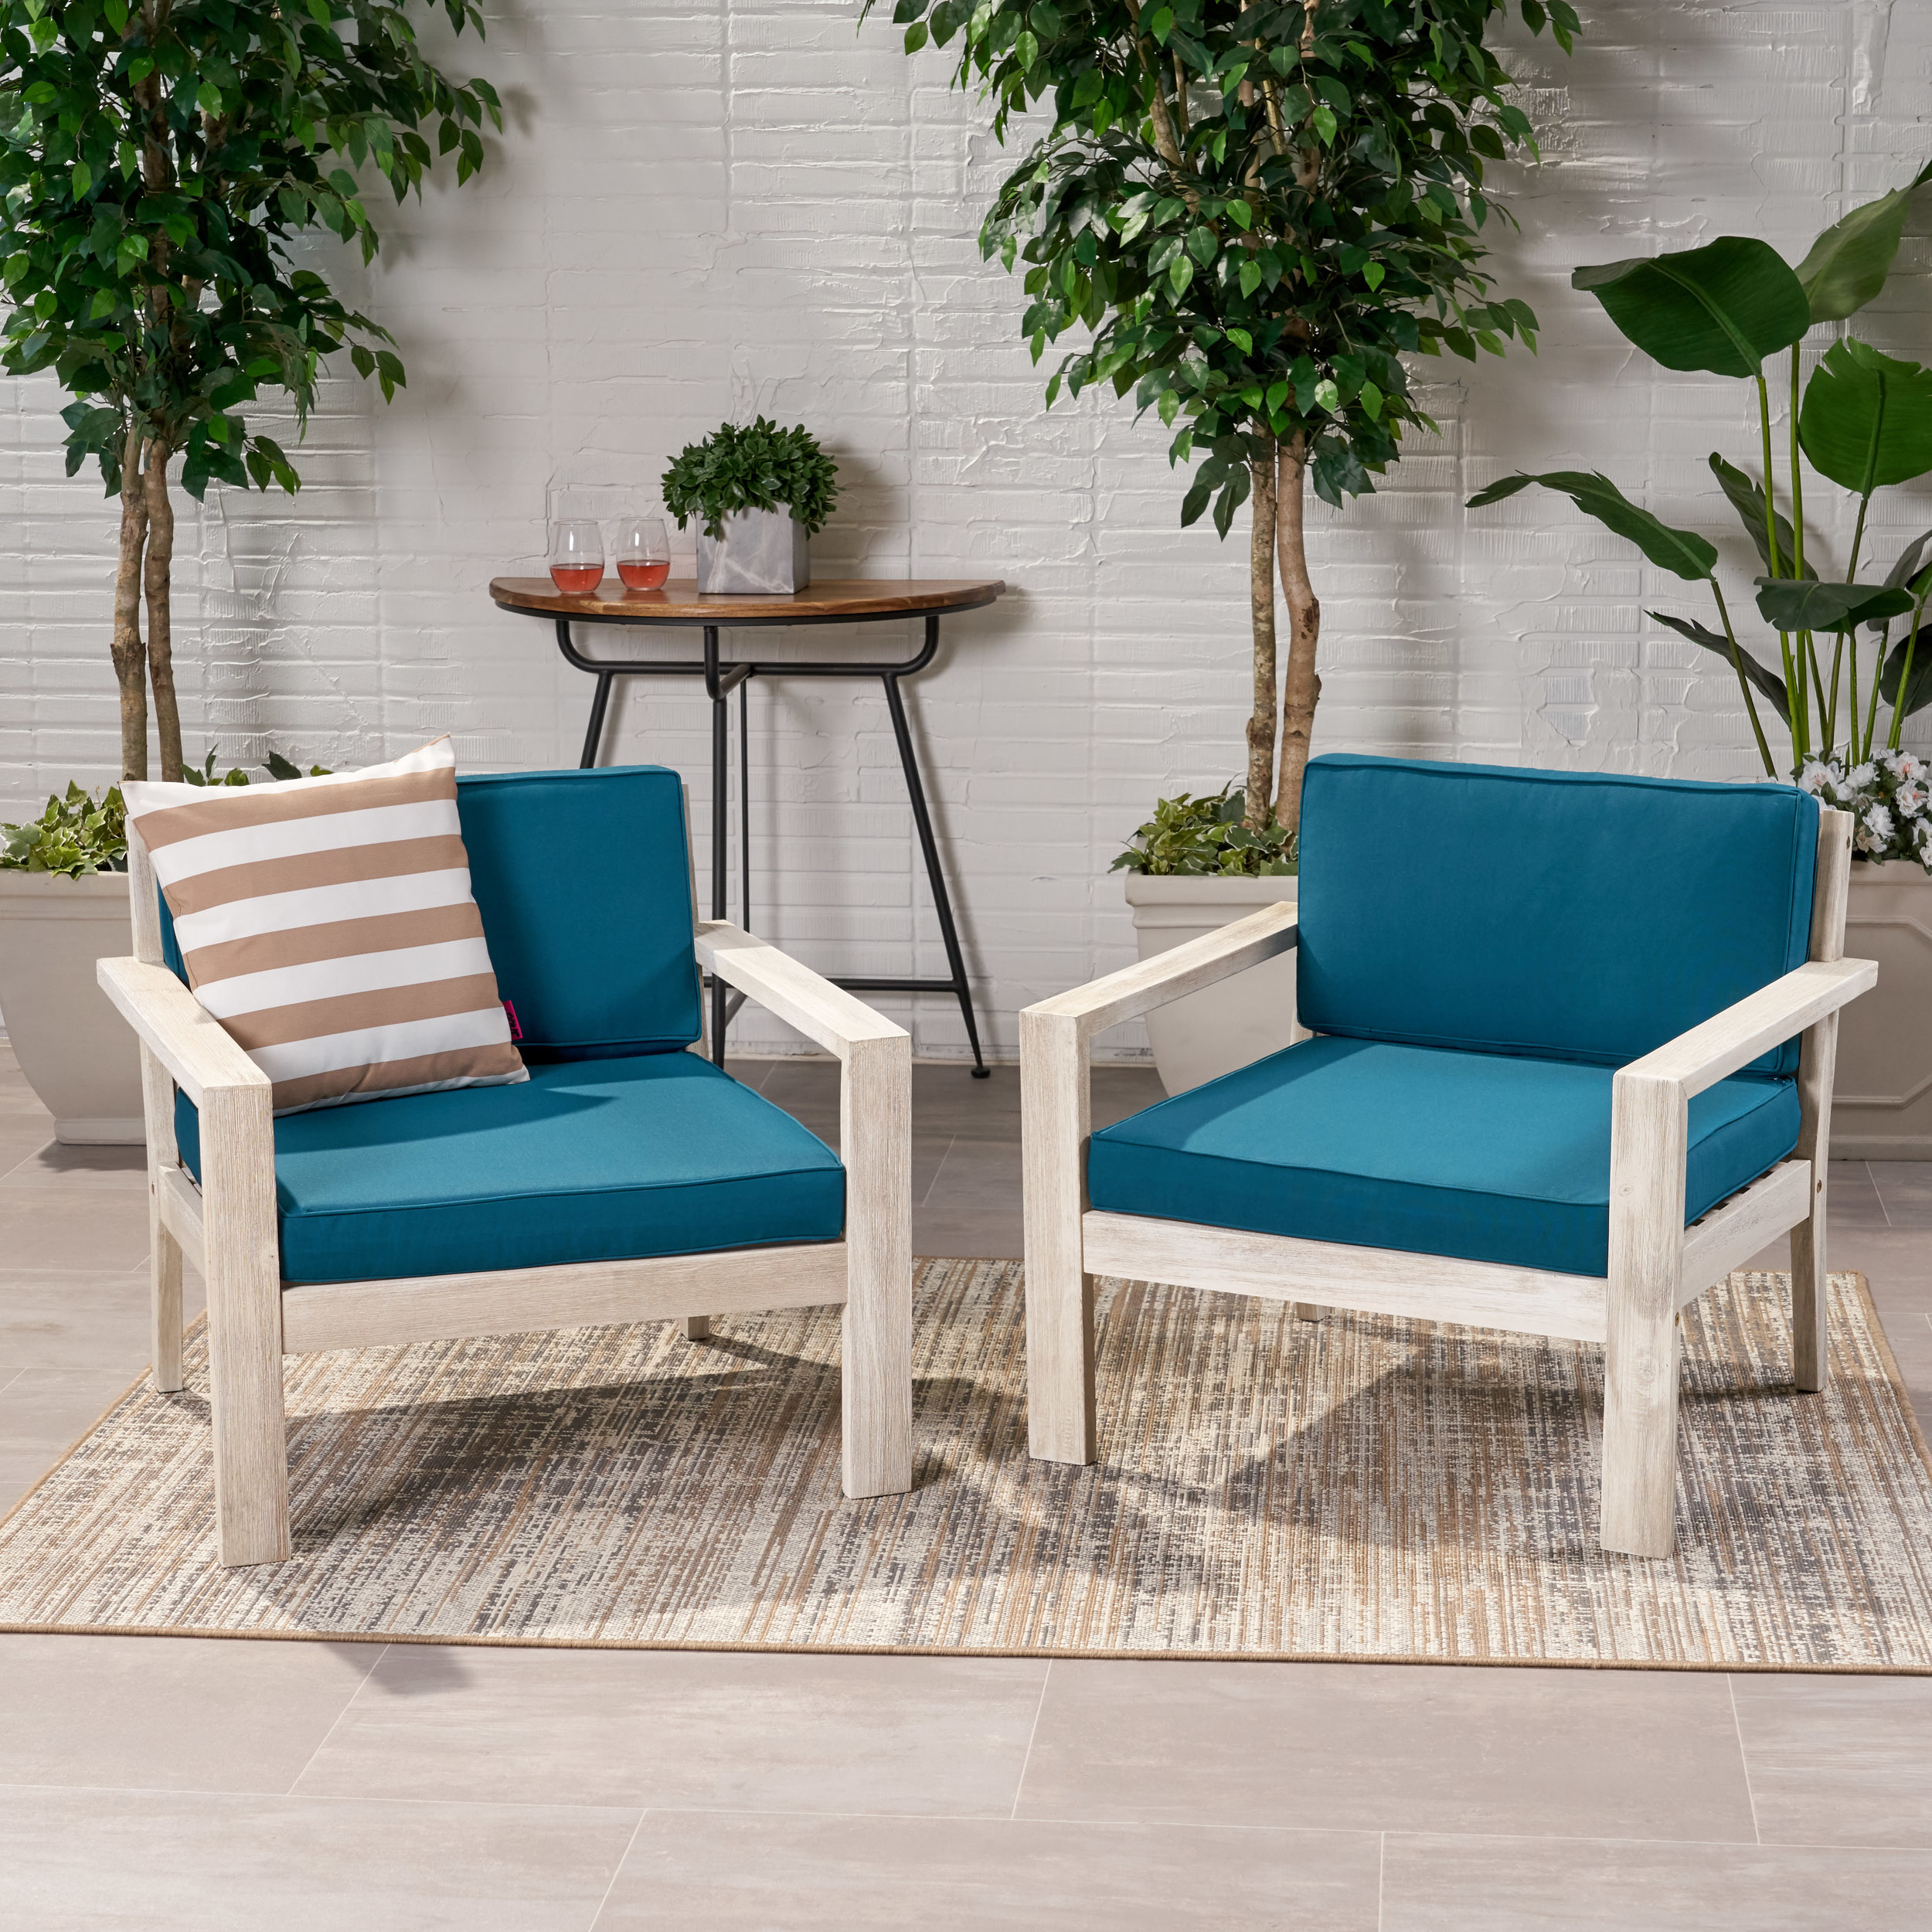 Beryl Outdoor Acacia Wood Club Chairs With Cushions (Set Of 2) - Brushed Light Gray Wash, Dark Teal